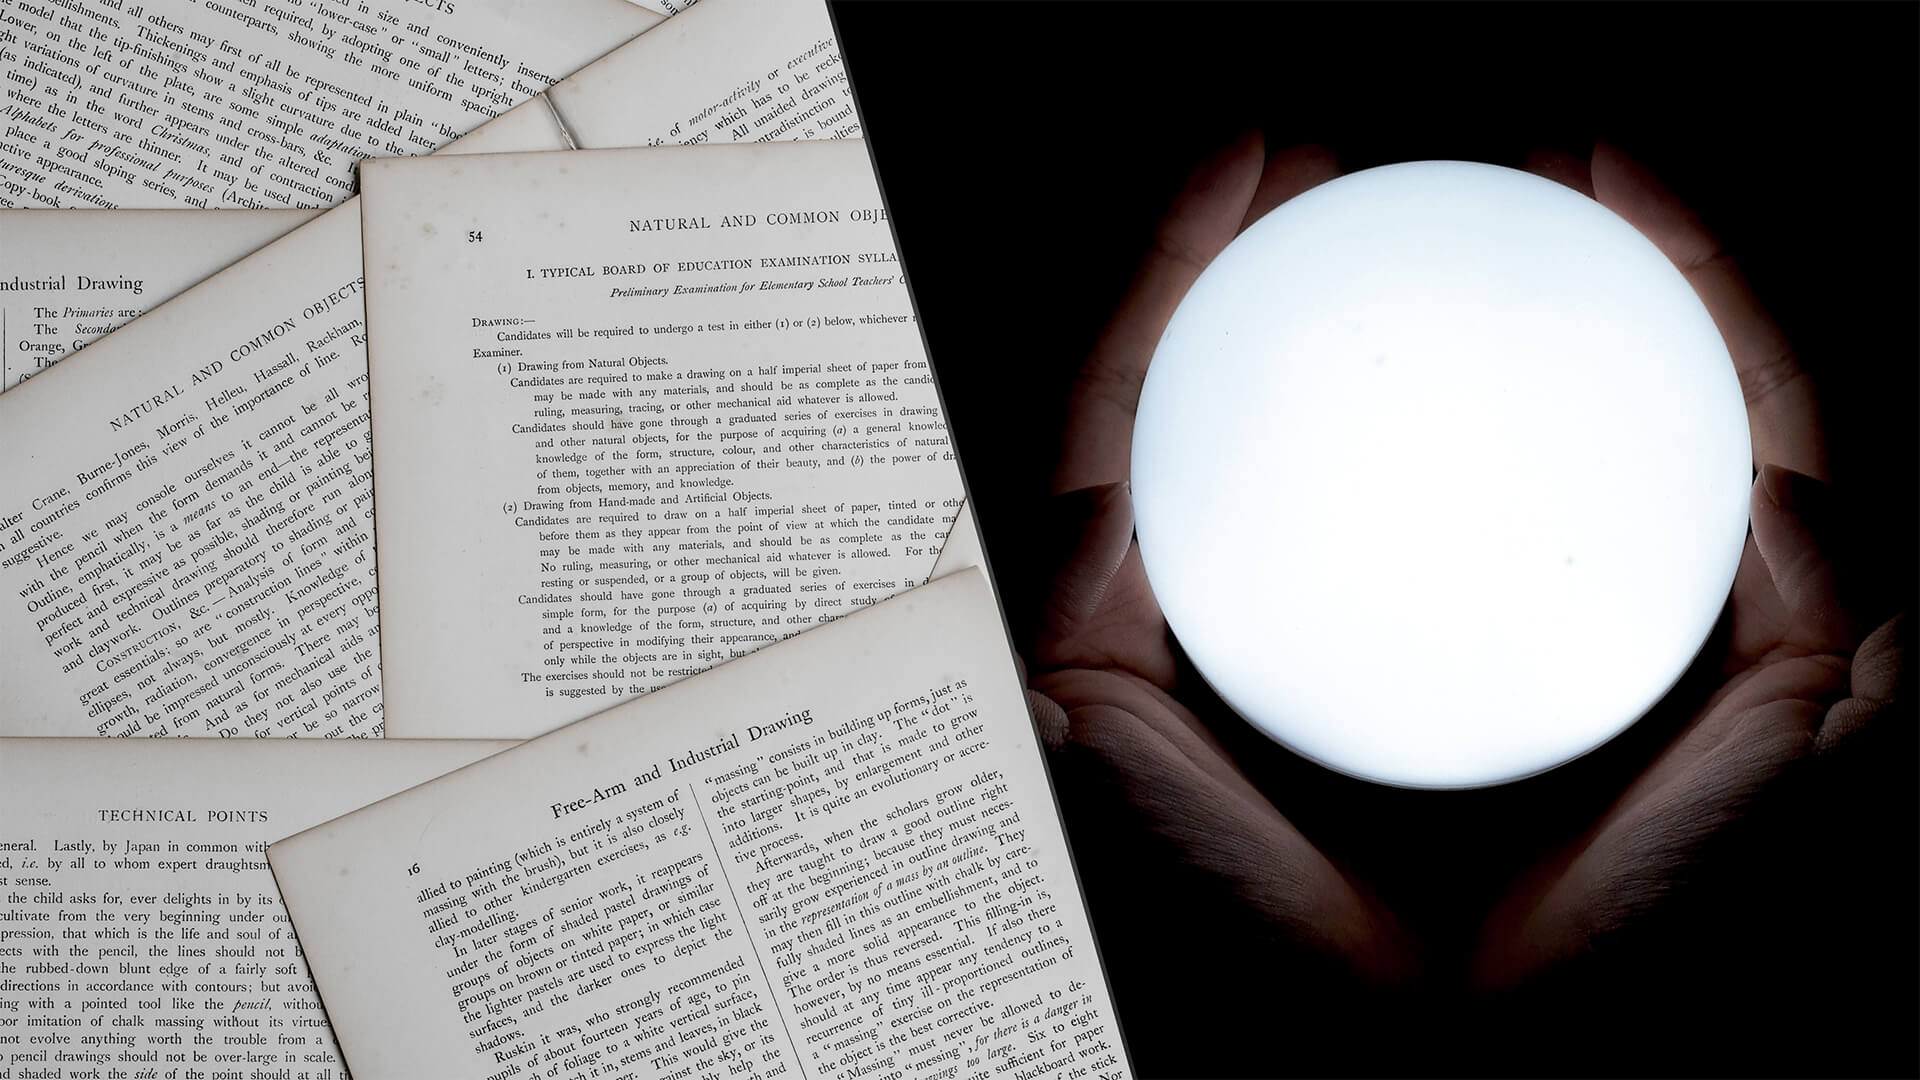 A collage with two images side-to-side showing a stack of scientific publications and two hands holding a glowing magic crystal ball, used here as a metaphor that by following the scientific advantages in your sector you will be able to predict how the future of your sector will unfold.